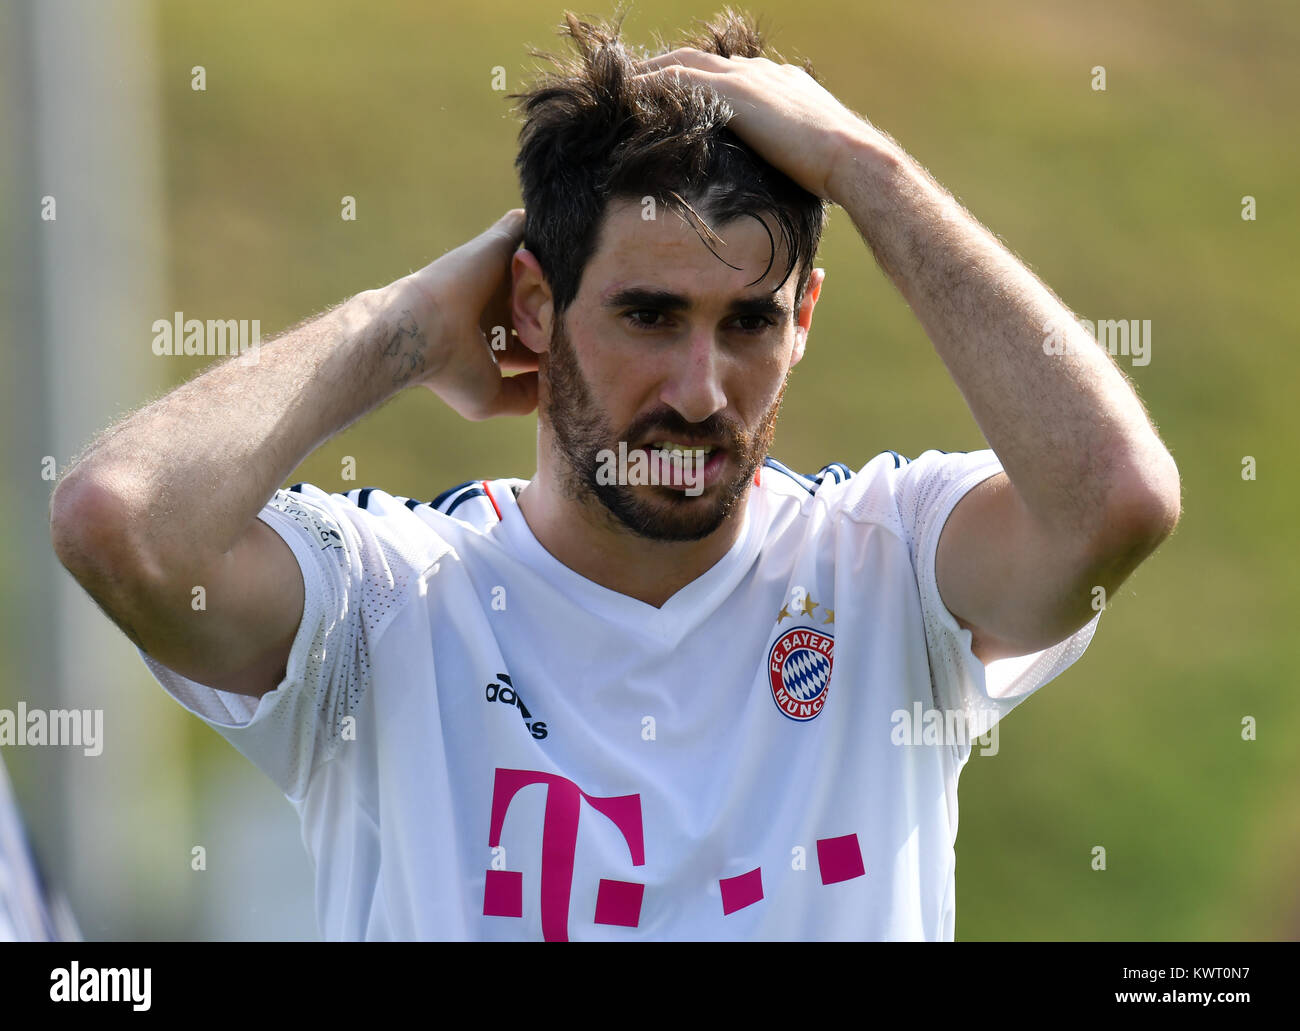 Doha, Qata. 5th Jan, 2018. Bayern Munich's Javi Martinez takes part in a training session during the team's winter training camp at the Aspire Academy of Sports Excellence in Doha, Qata, on Jan. 5, 2018. Credit: Nikku/Xinhua/Alamy Live News Stock Photo